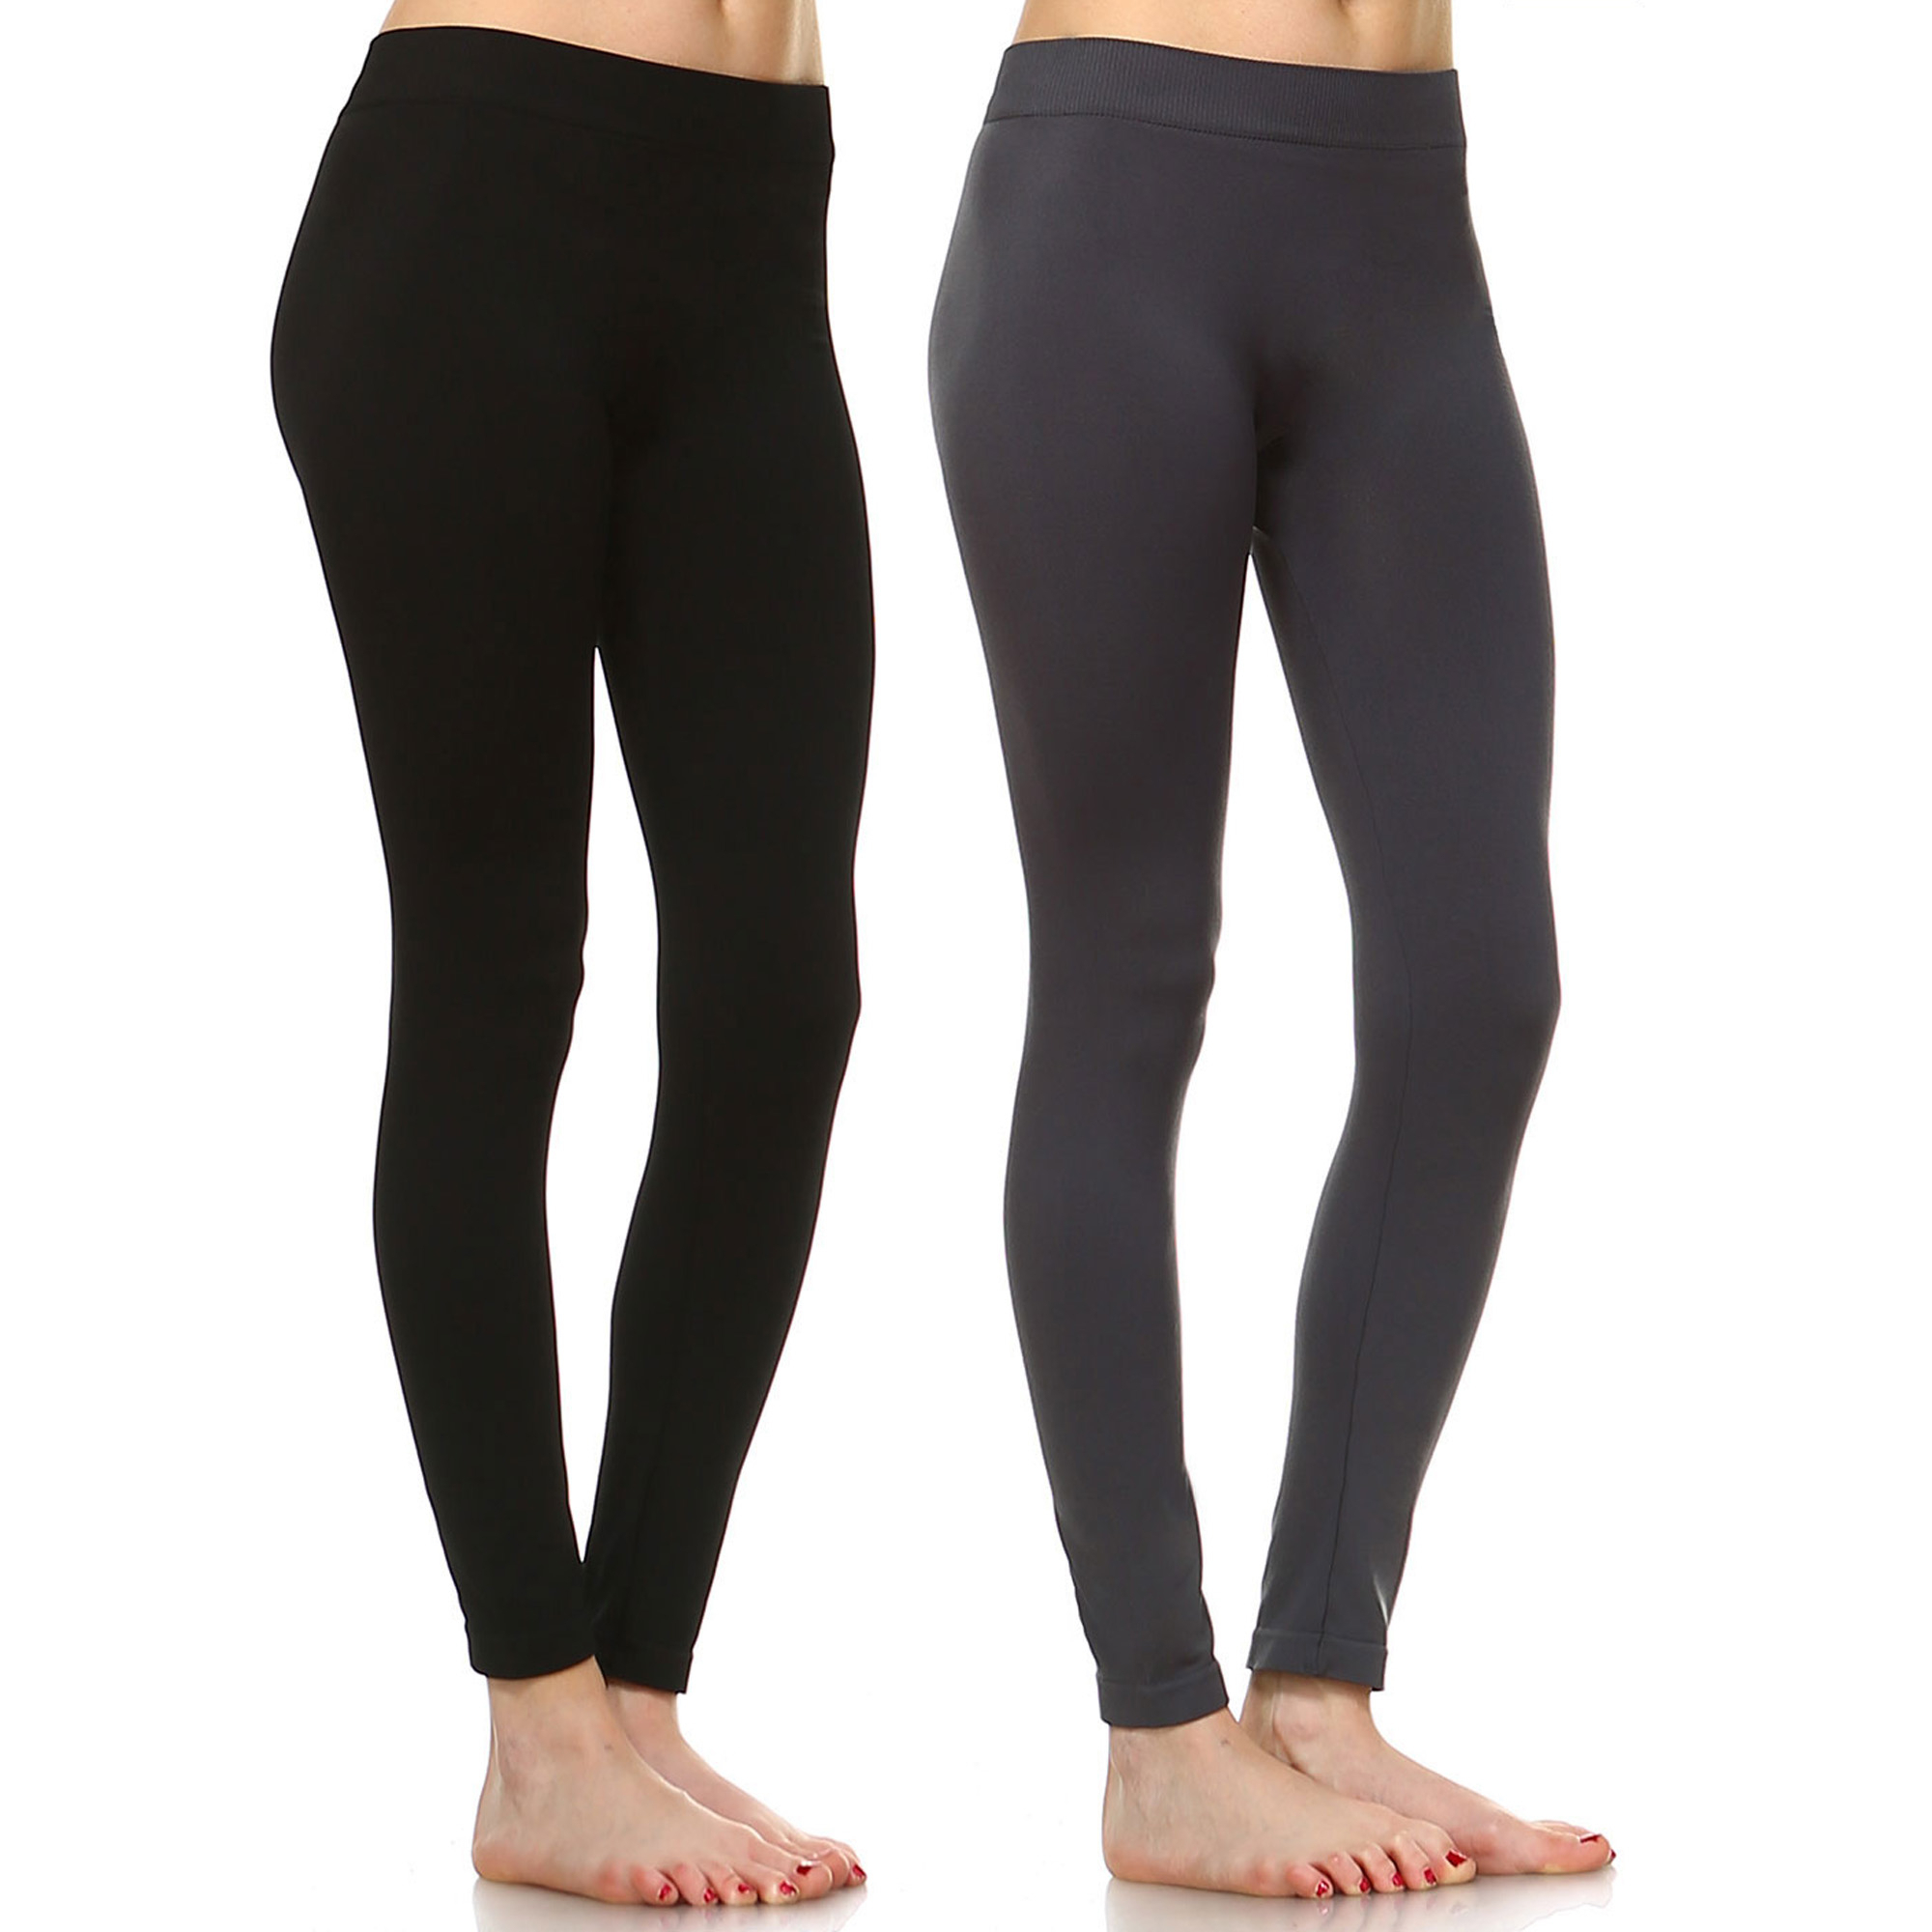 White Mark Women's Pack Of 2 Solid Color Leggings - Black, Charcoal., One Size - Plus